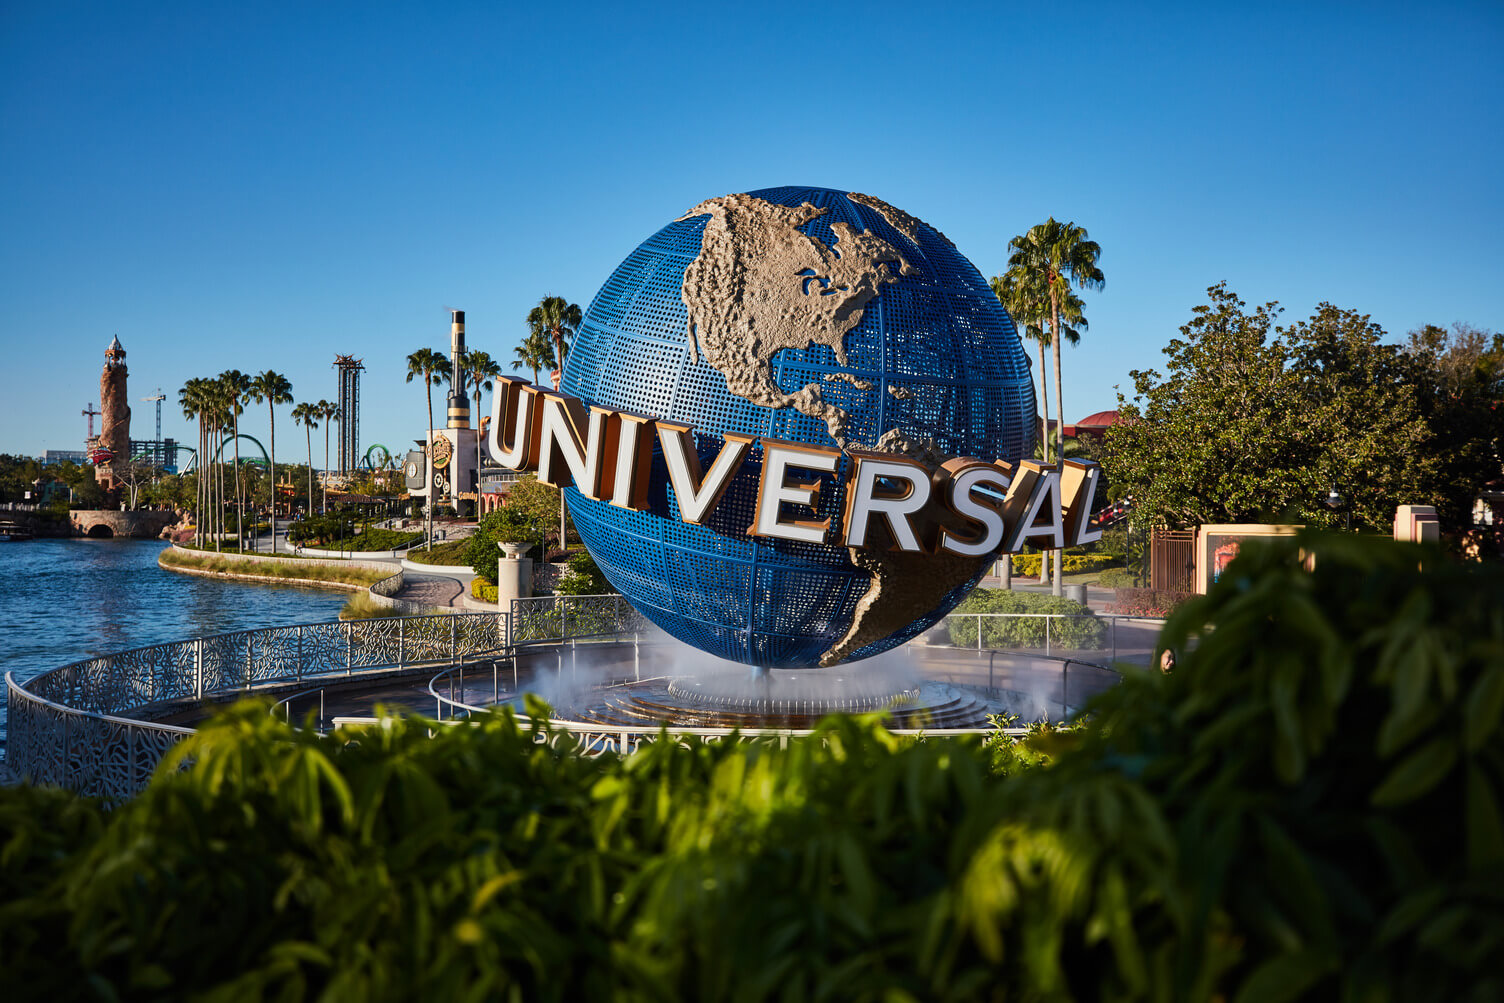 Guide to Universal Studios Orlando in One Day - How to Do Universal in One  Day 2024